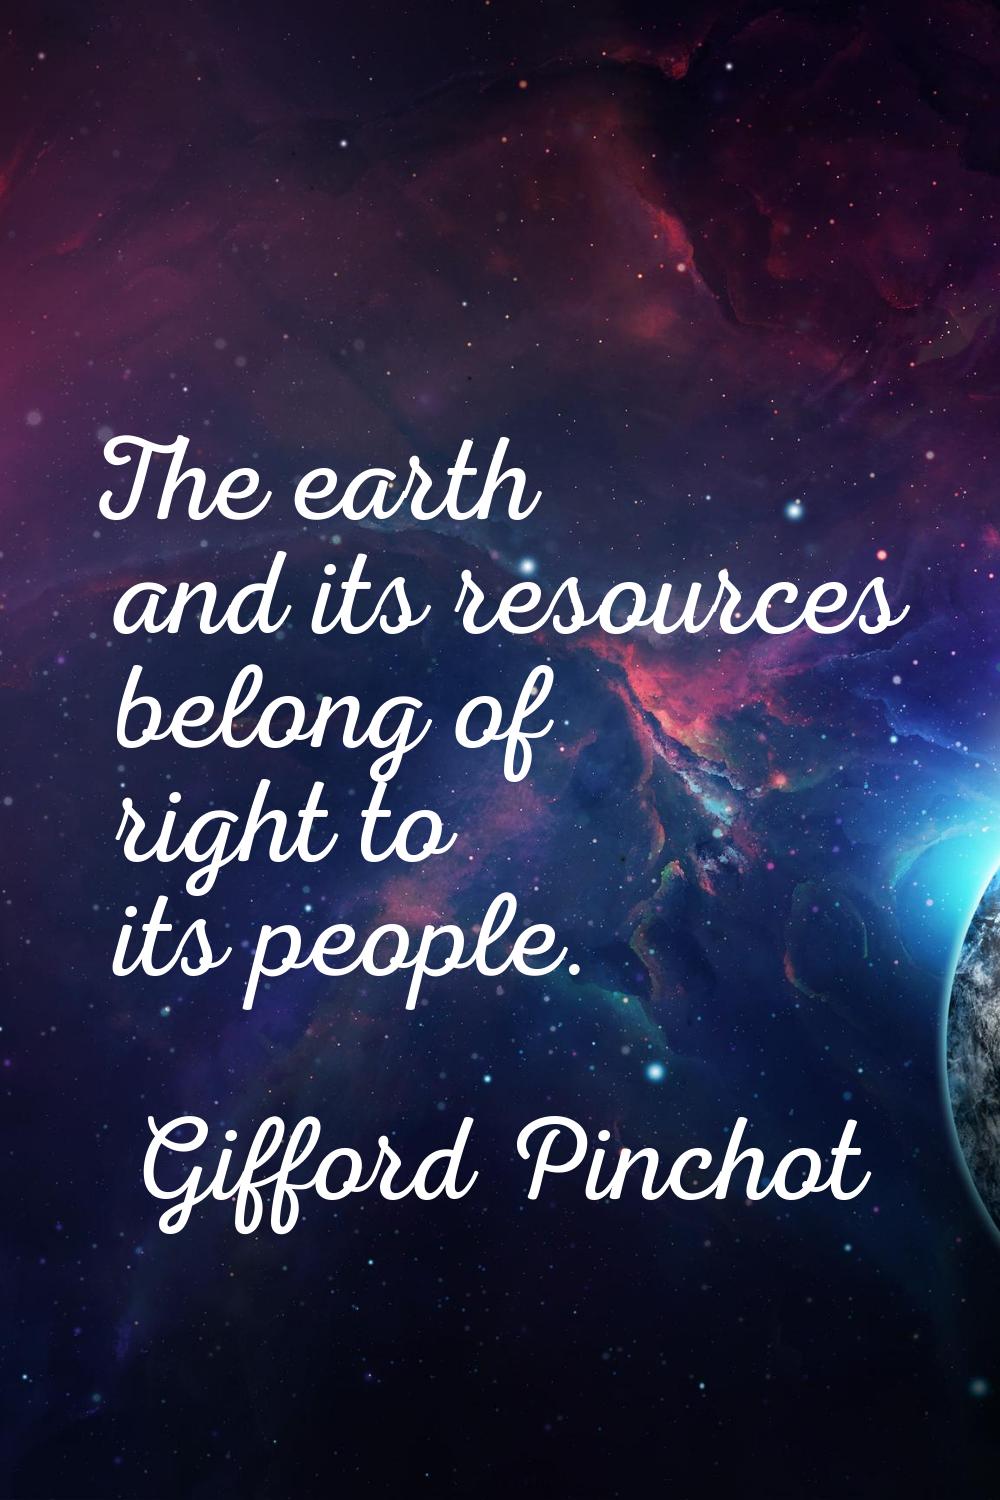 The earth and its resources belong of right to its people.